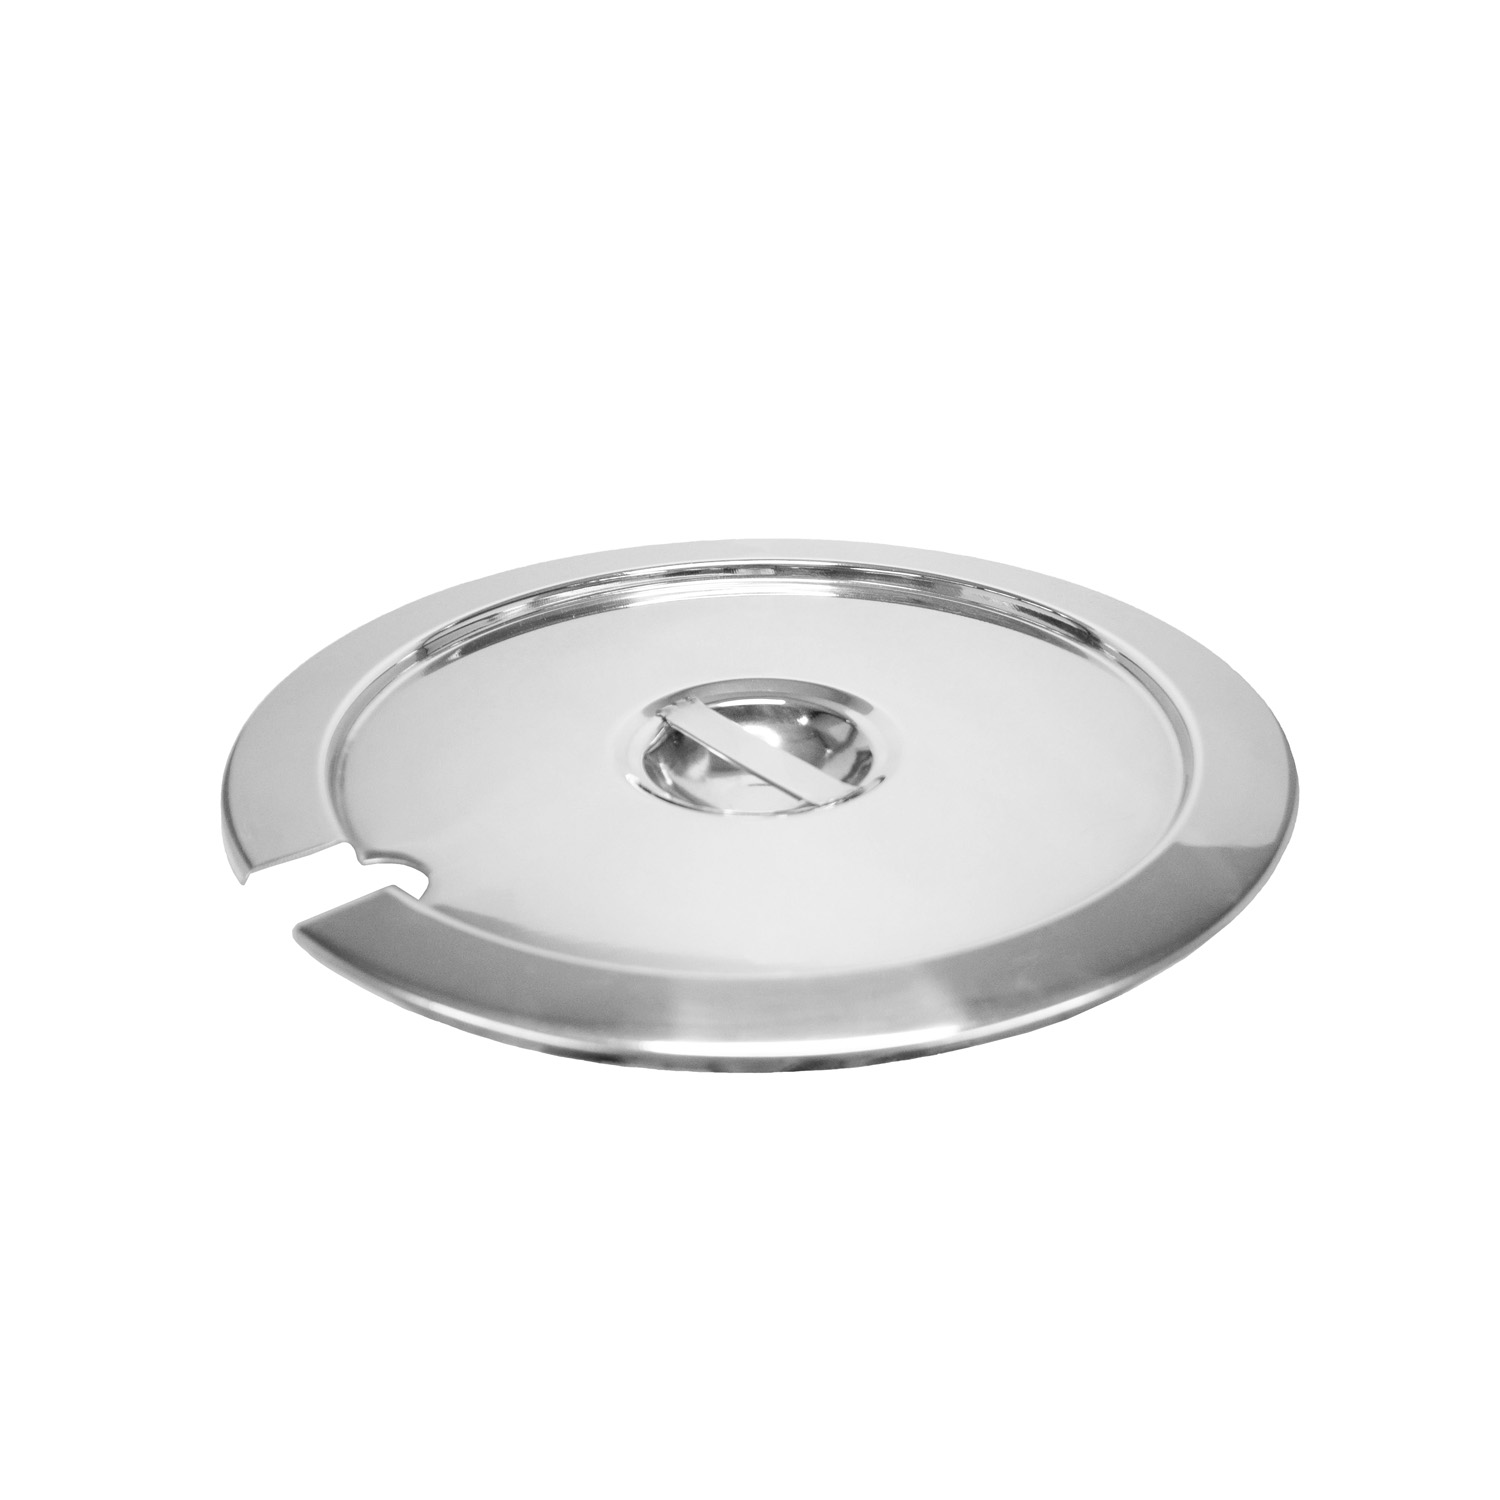 CAC China INSS-110C Stainless Steel Cover for INSS-110F